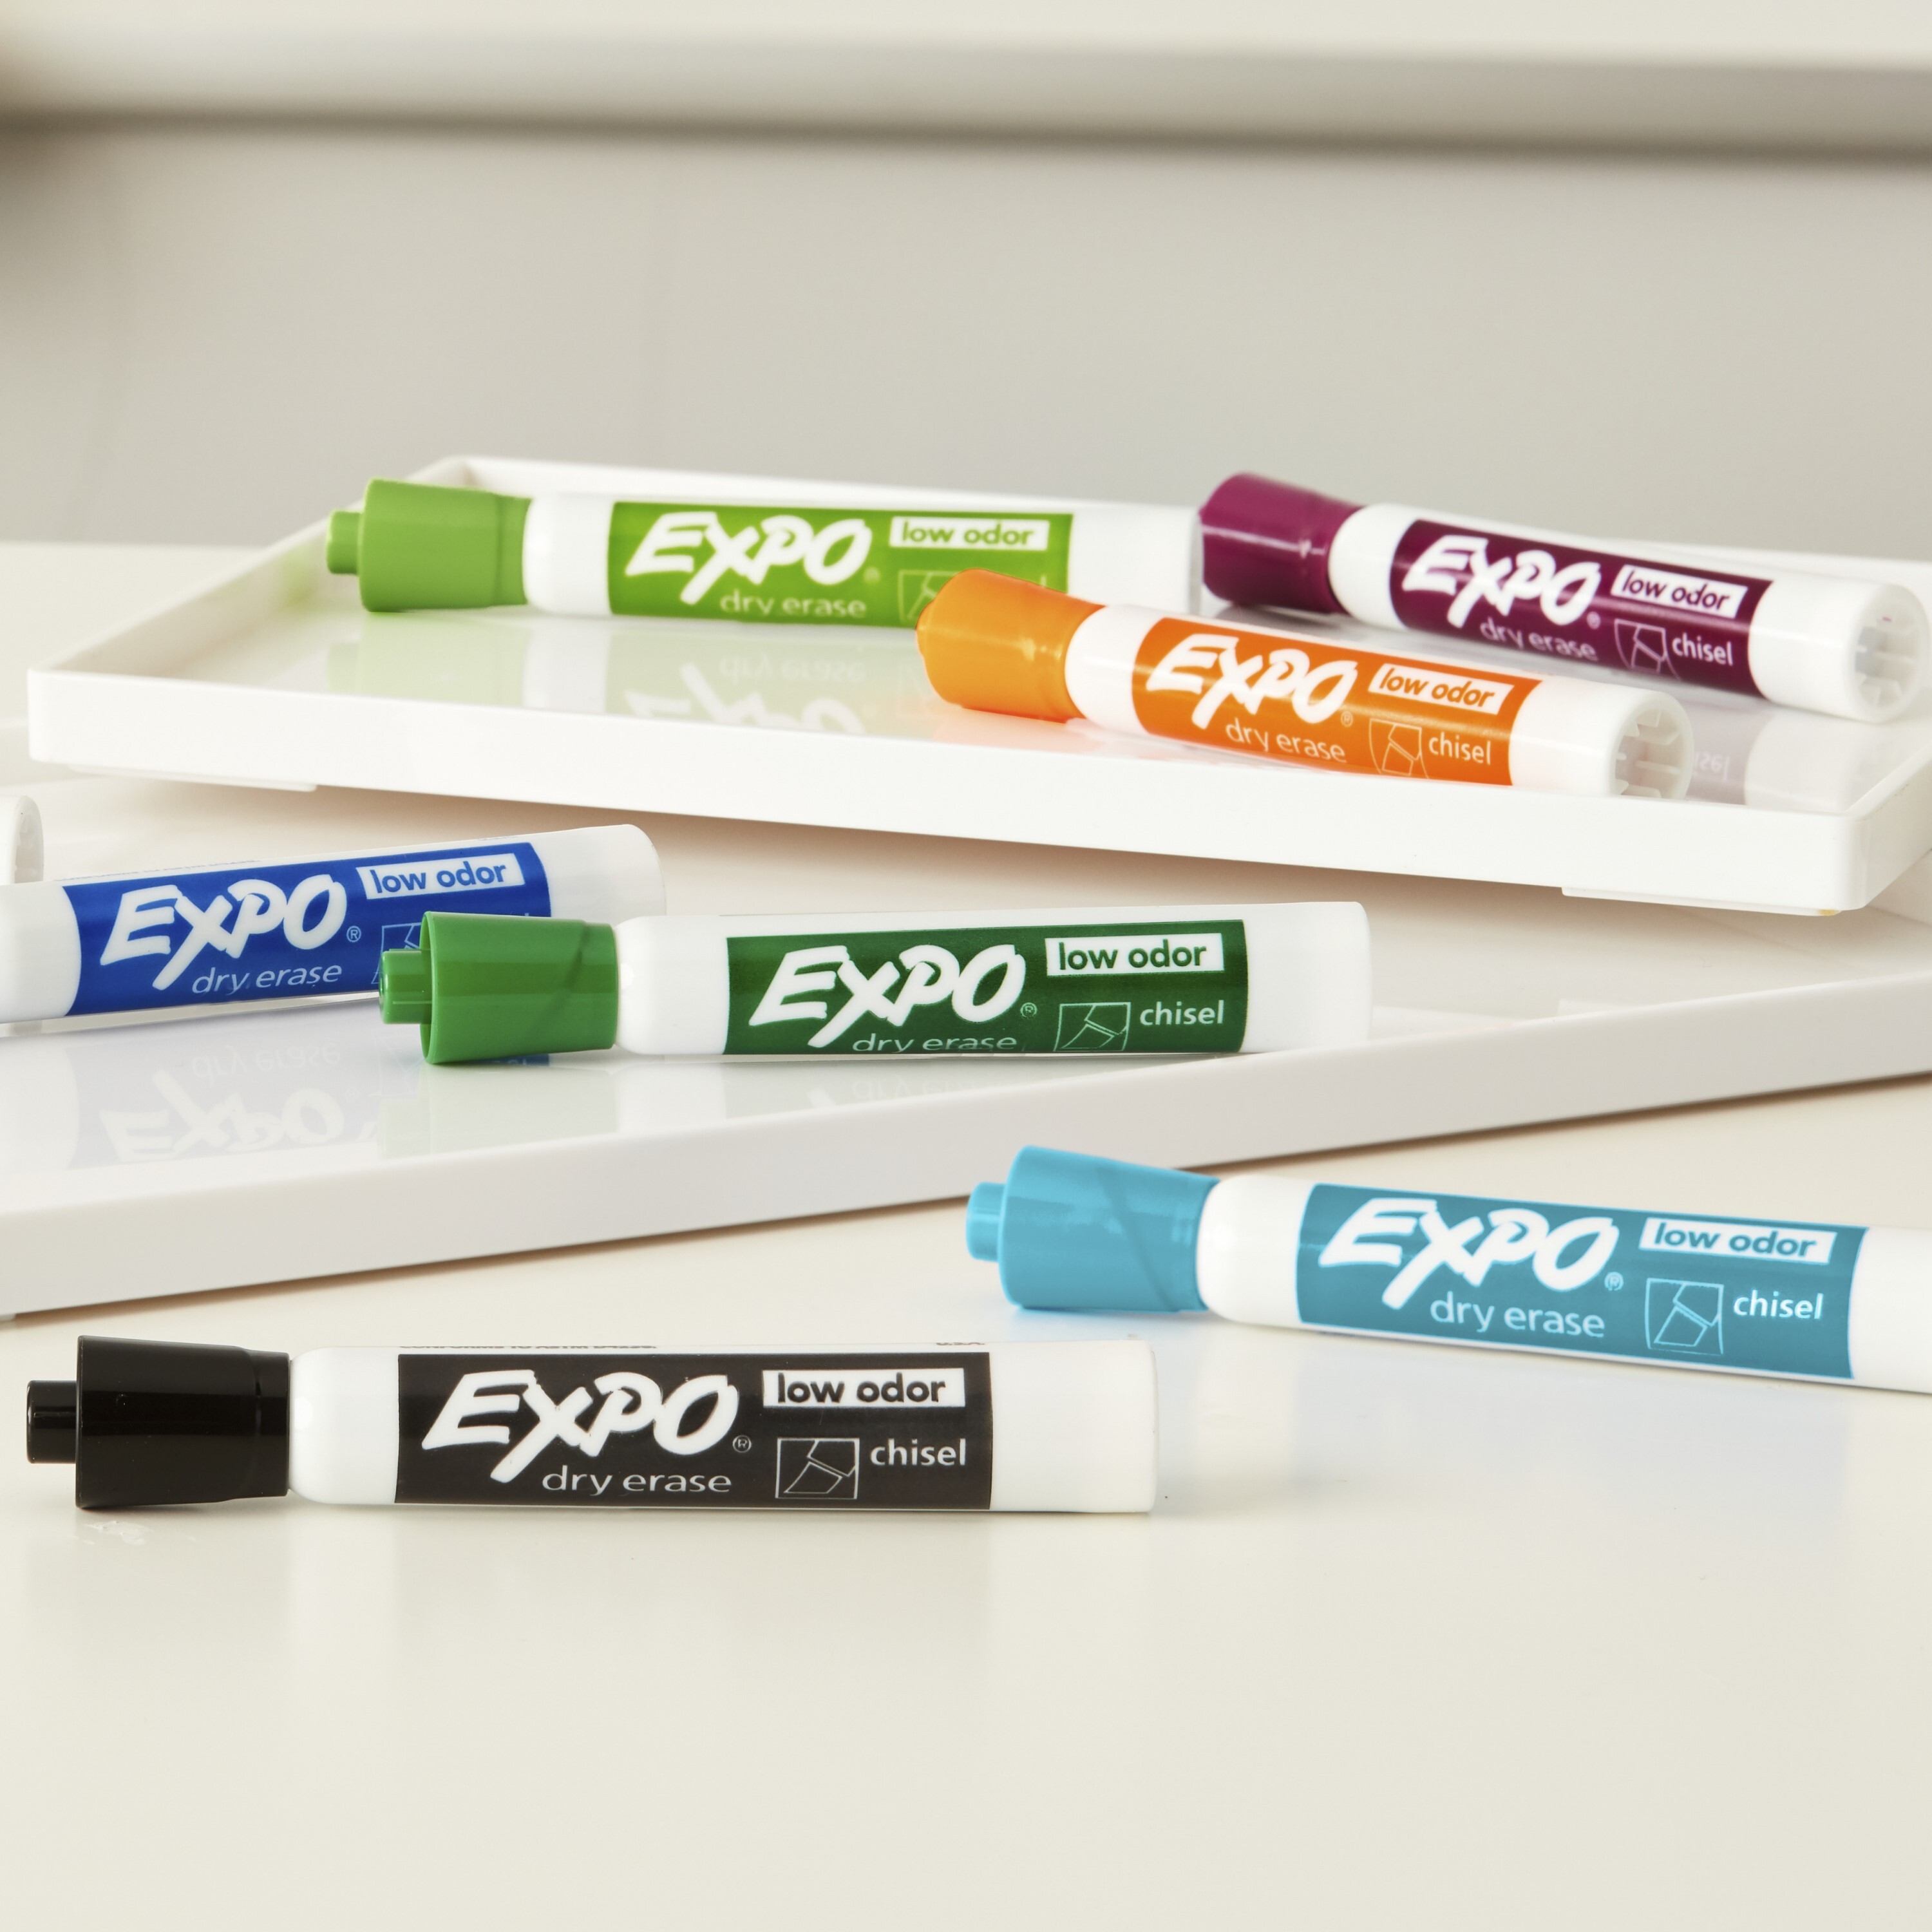 Expo Low Odor Dry Erase Markers, Chisel and Fine Tip, Assorted Colors, Eraser, 7 Piece Set - image 3 of 8